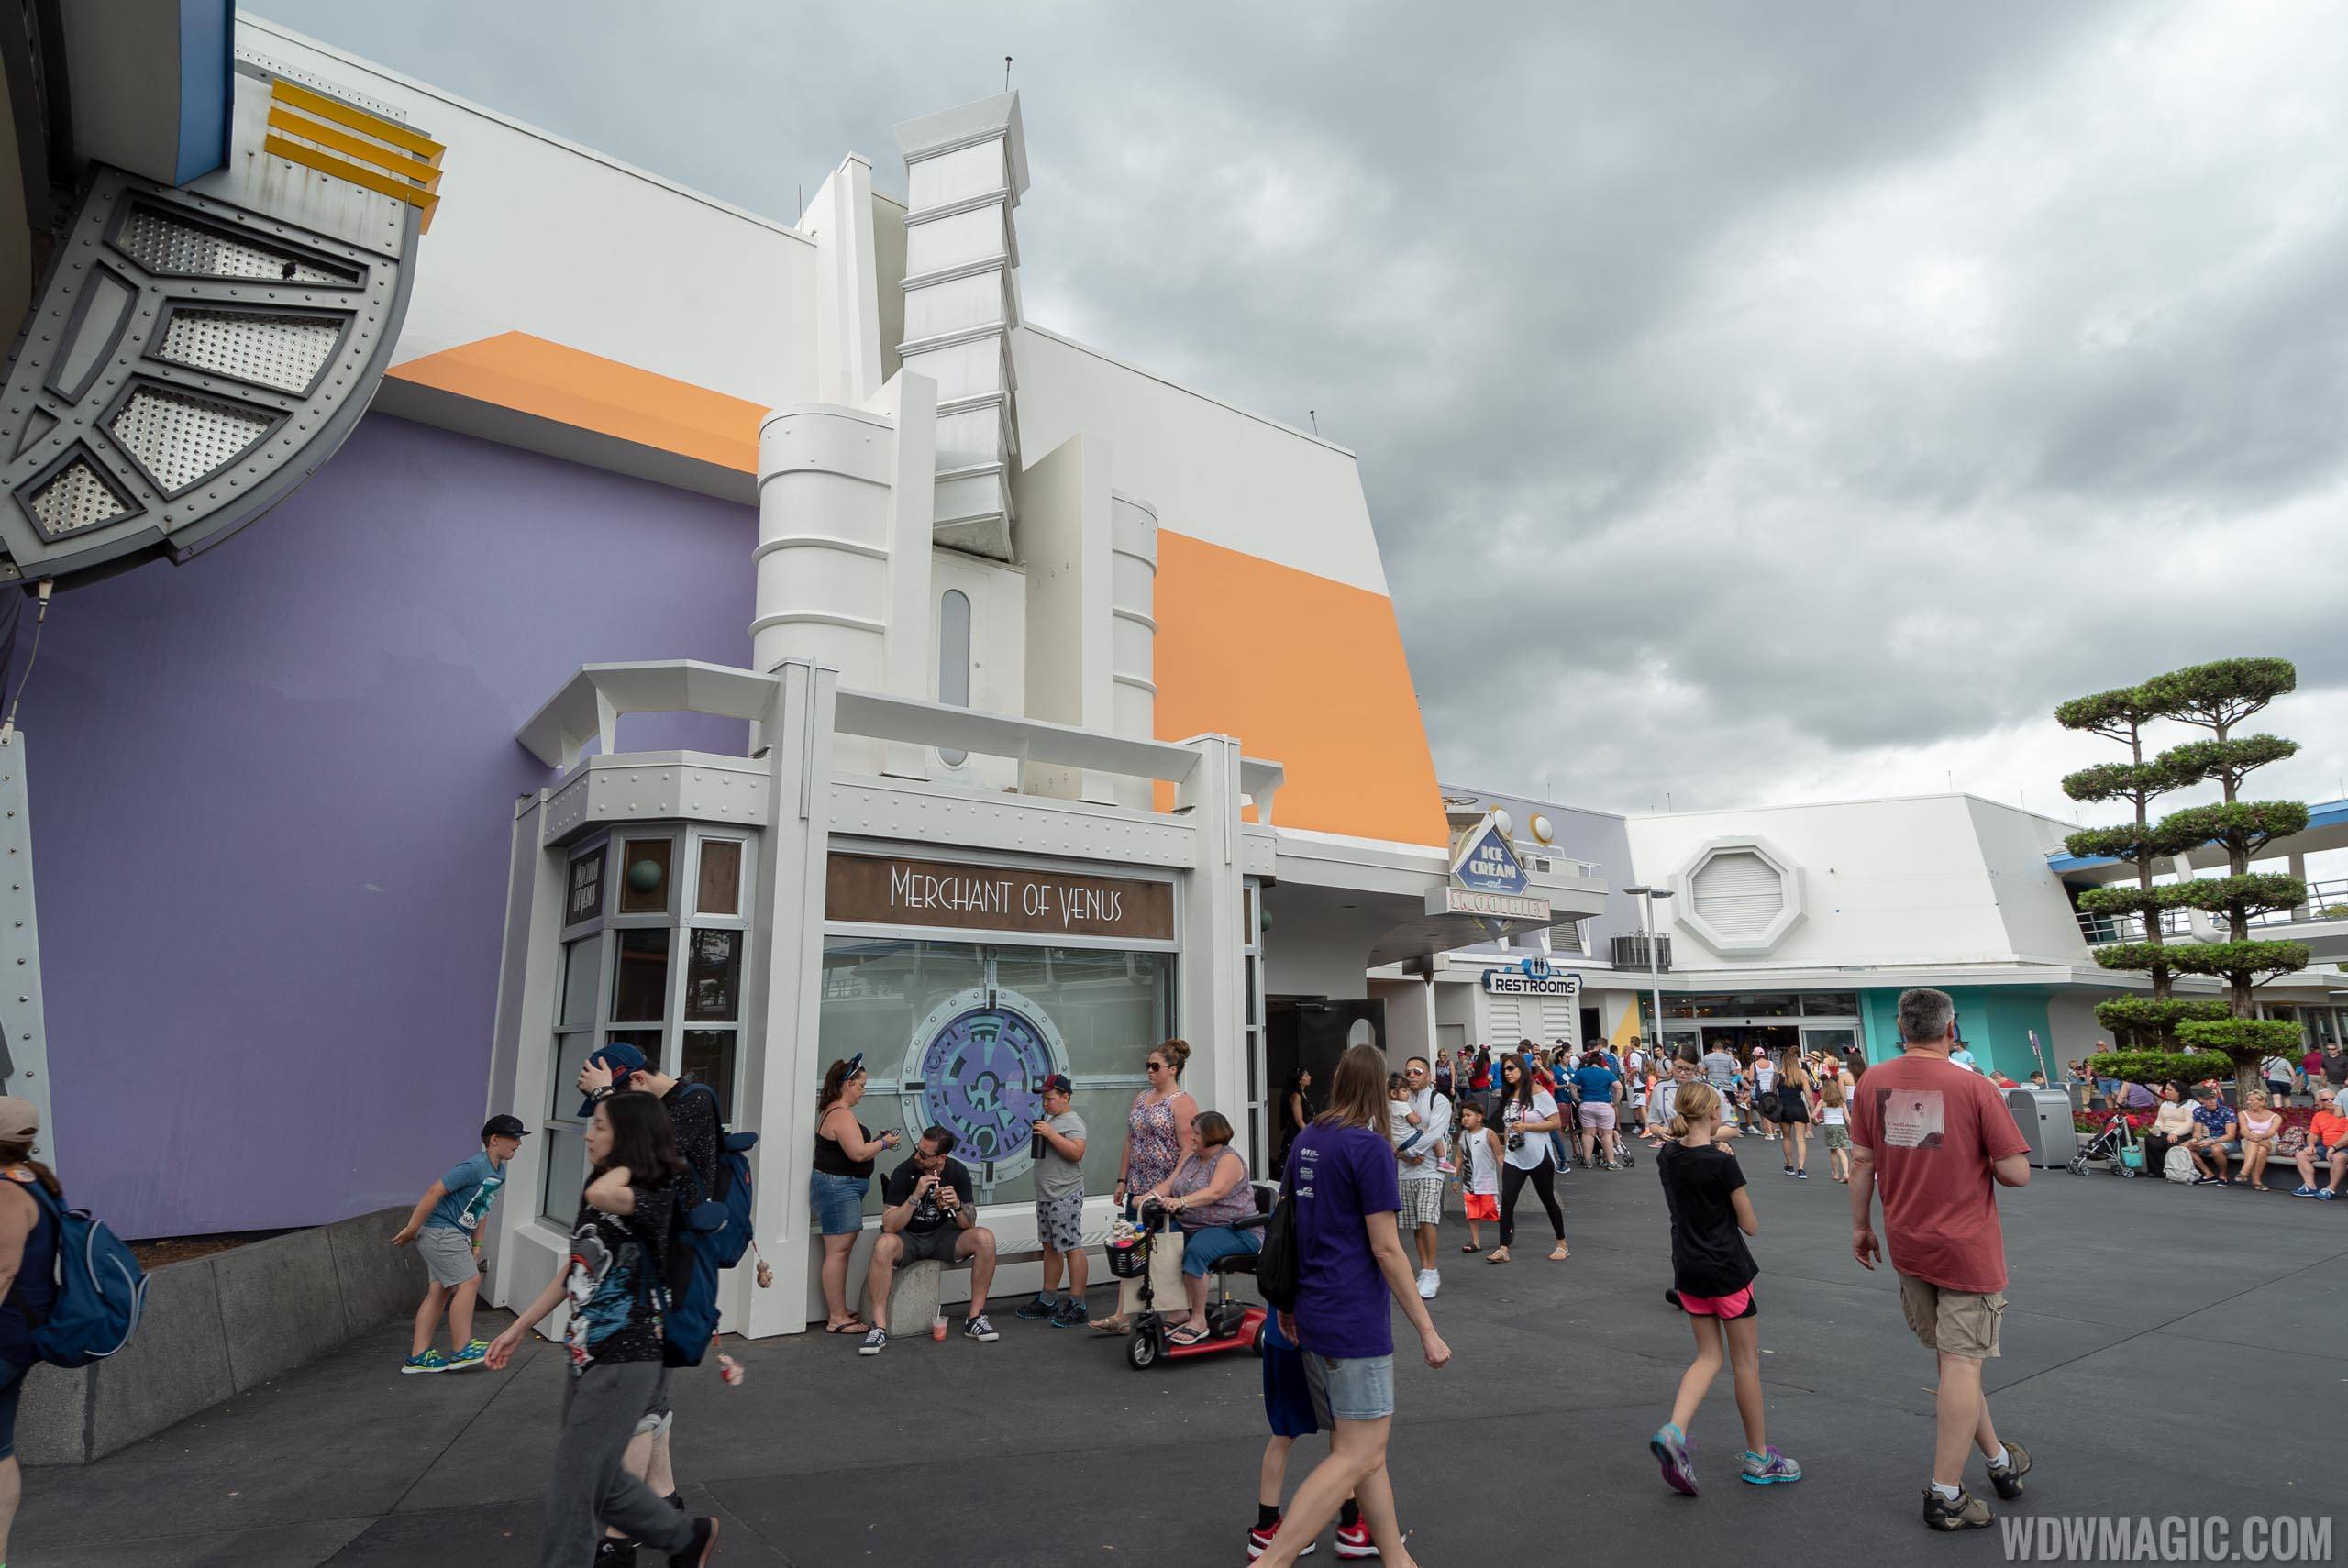 Tomorrowland paint changes around Mickey's Star Traders - April 2019